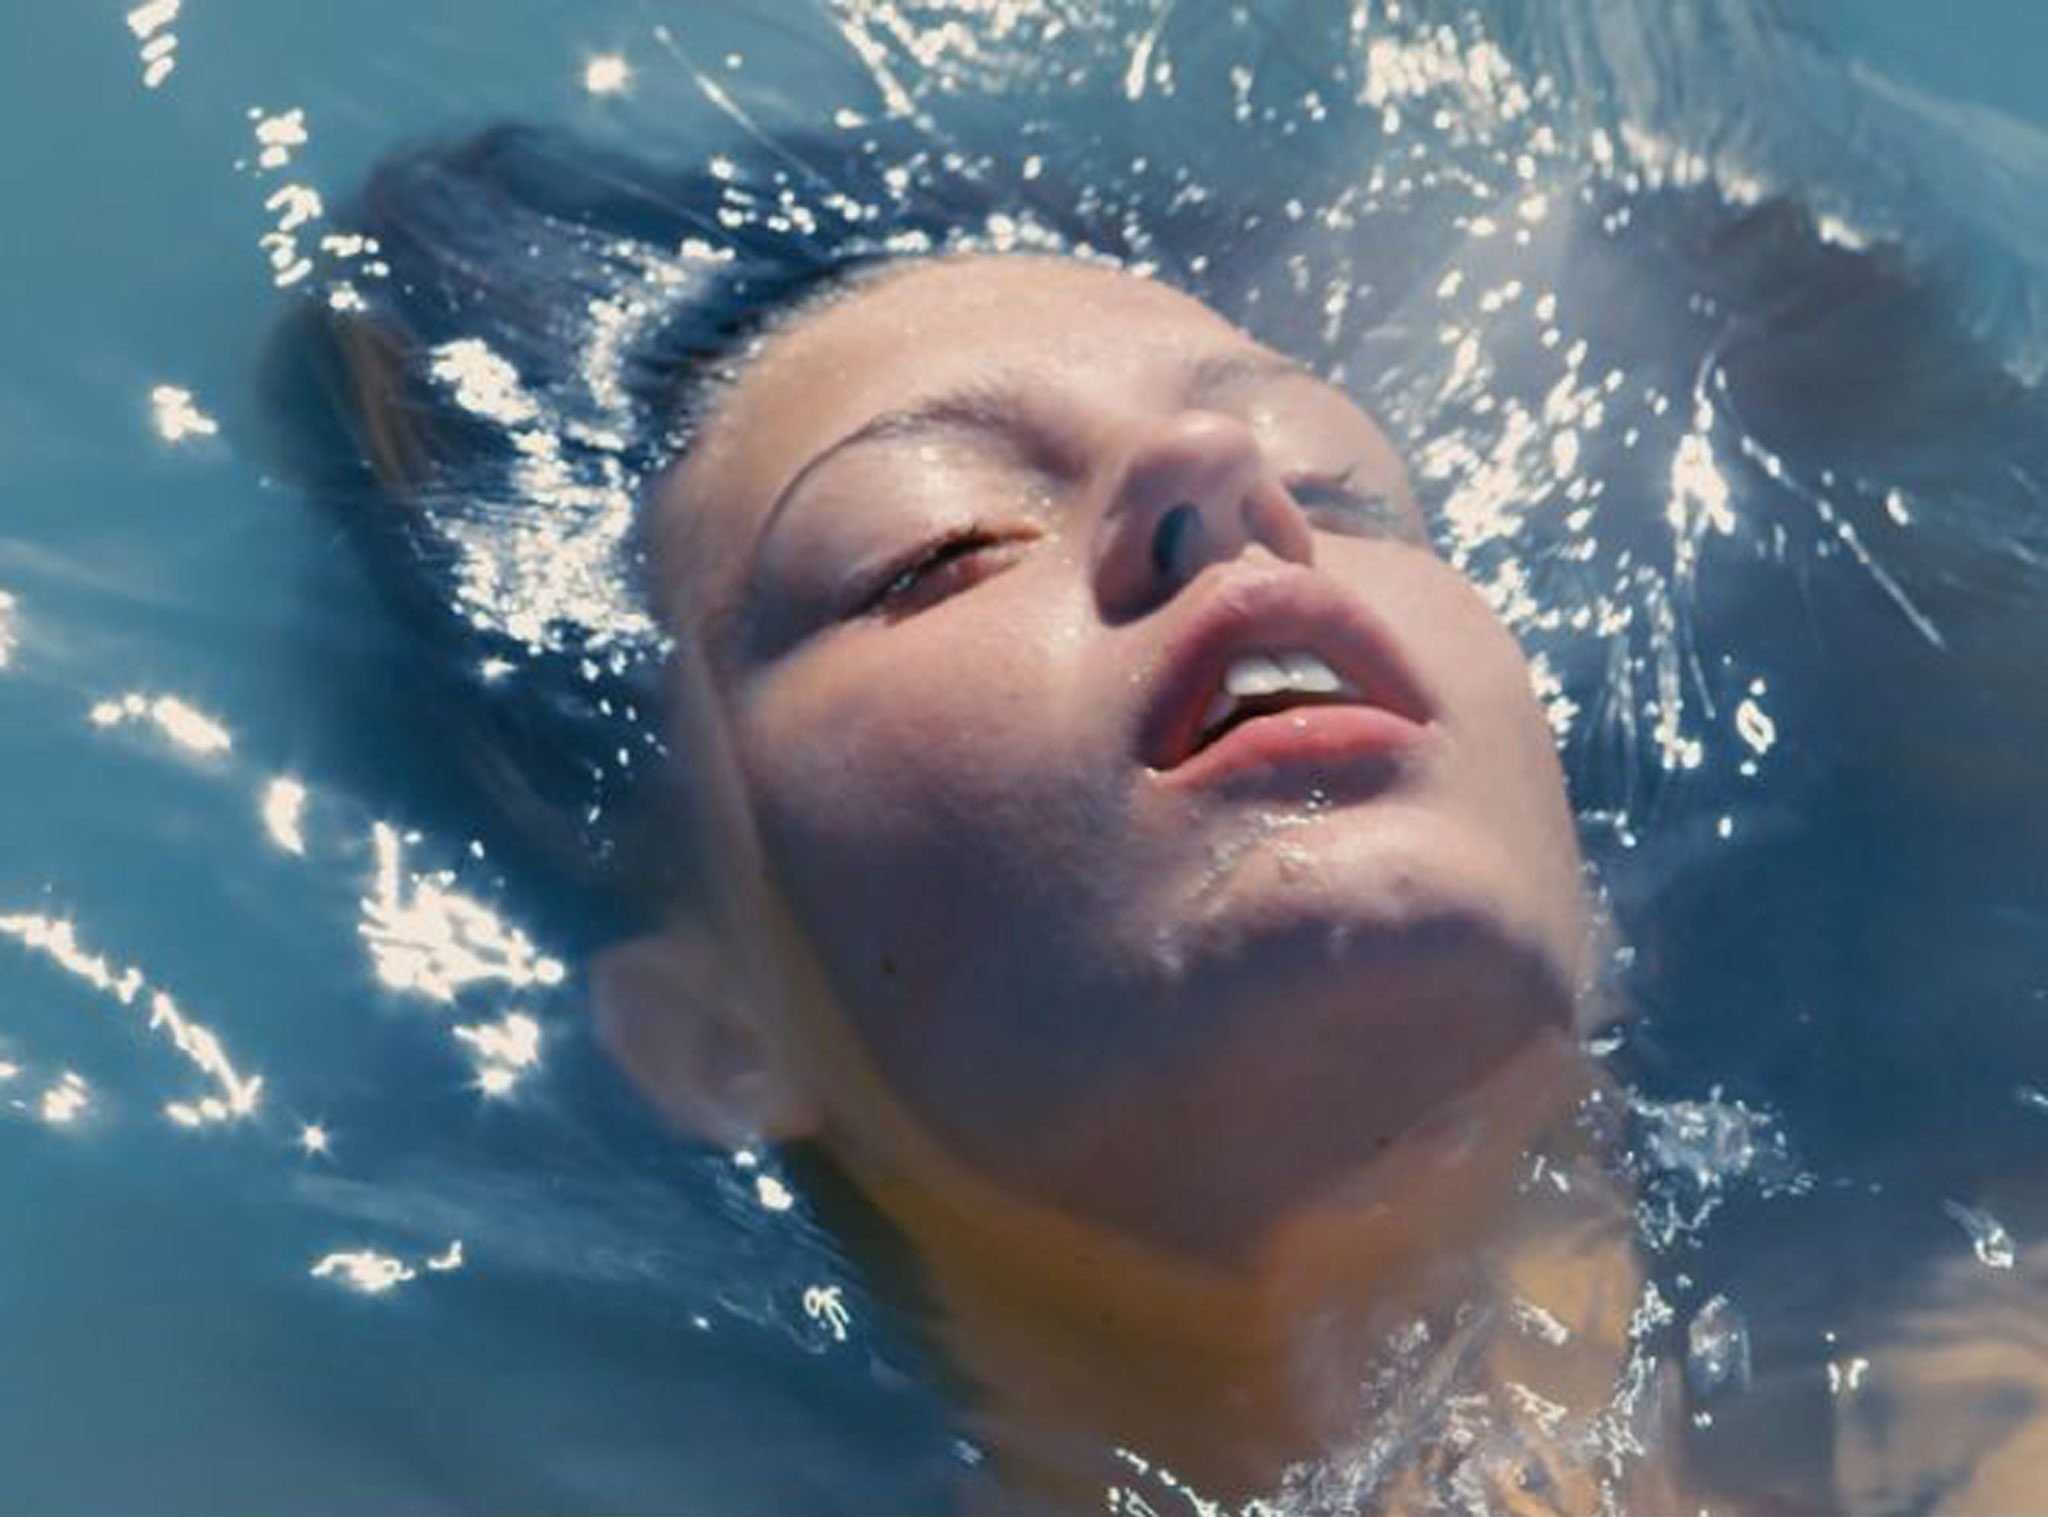 Blue Film Adele Video - Blue is the Warmest Colour: More than the sum of its parts | The ...